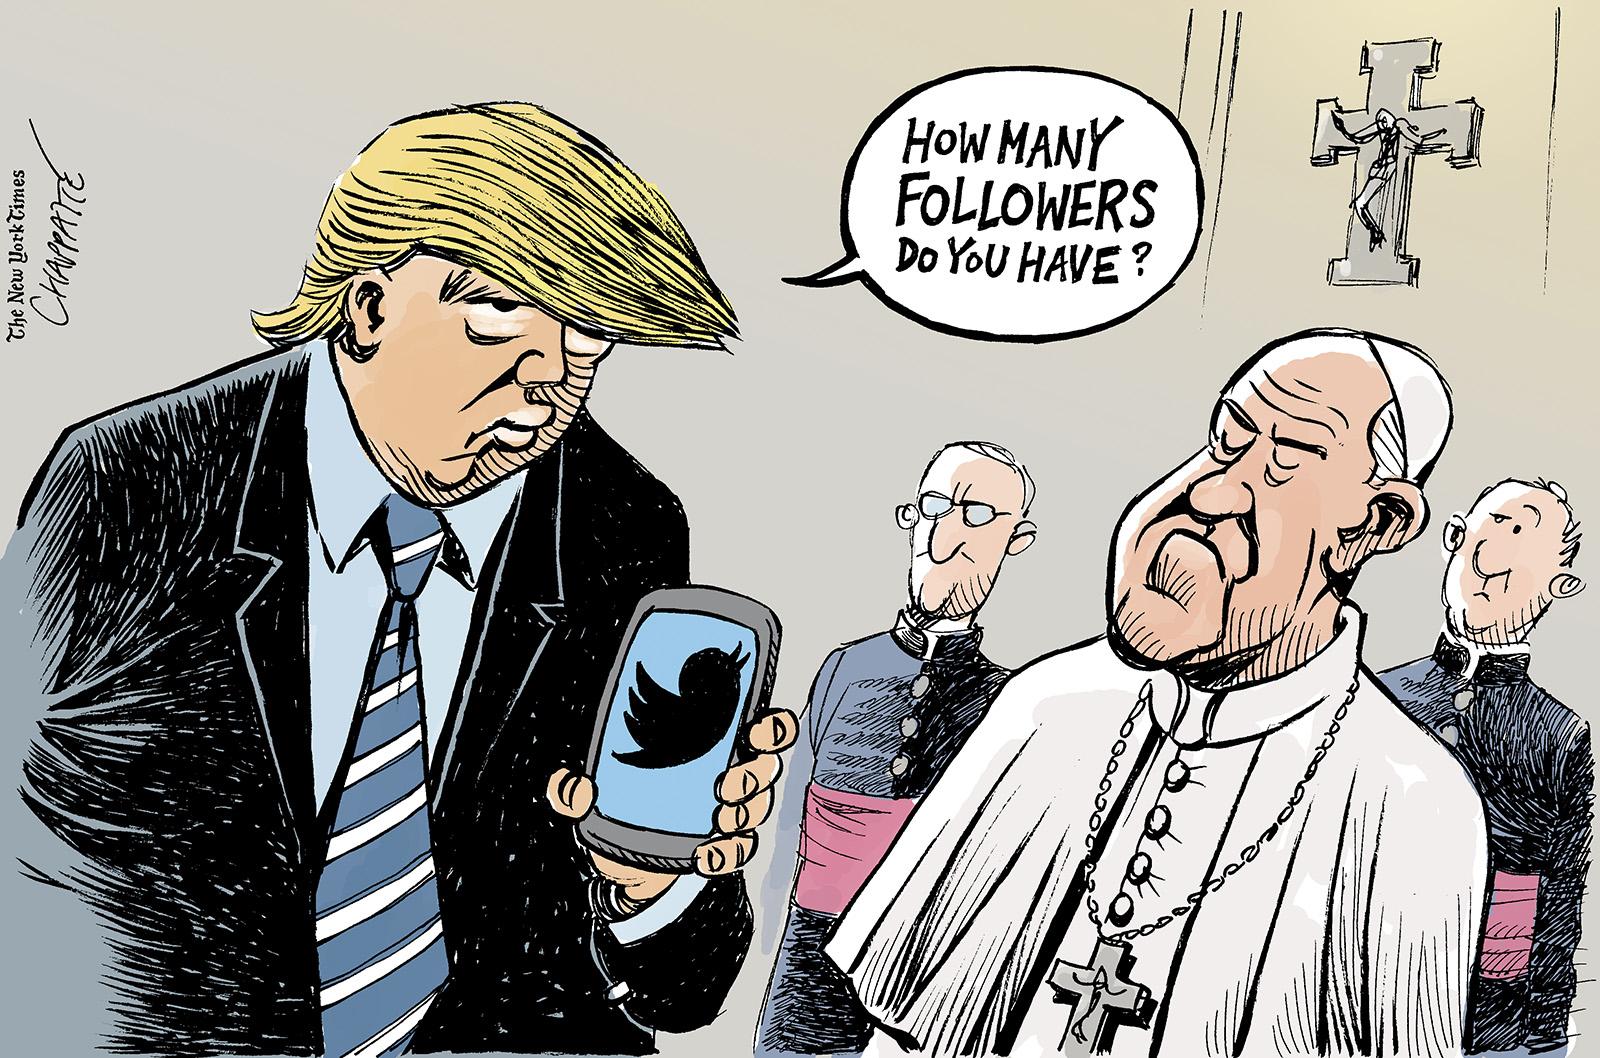 Trump meets the pope